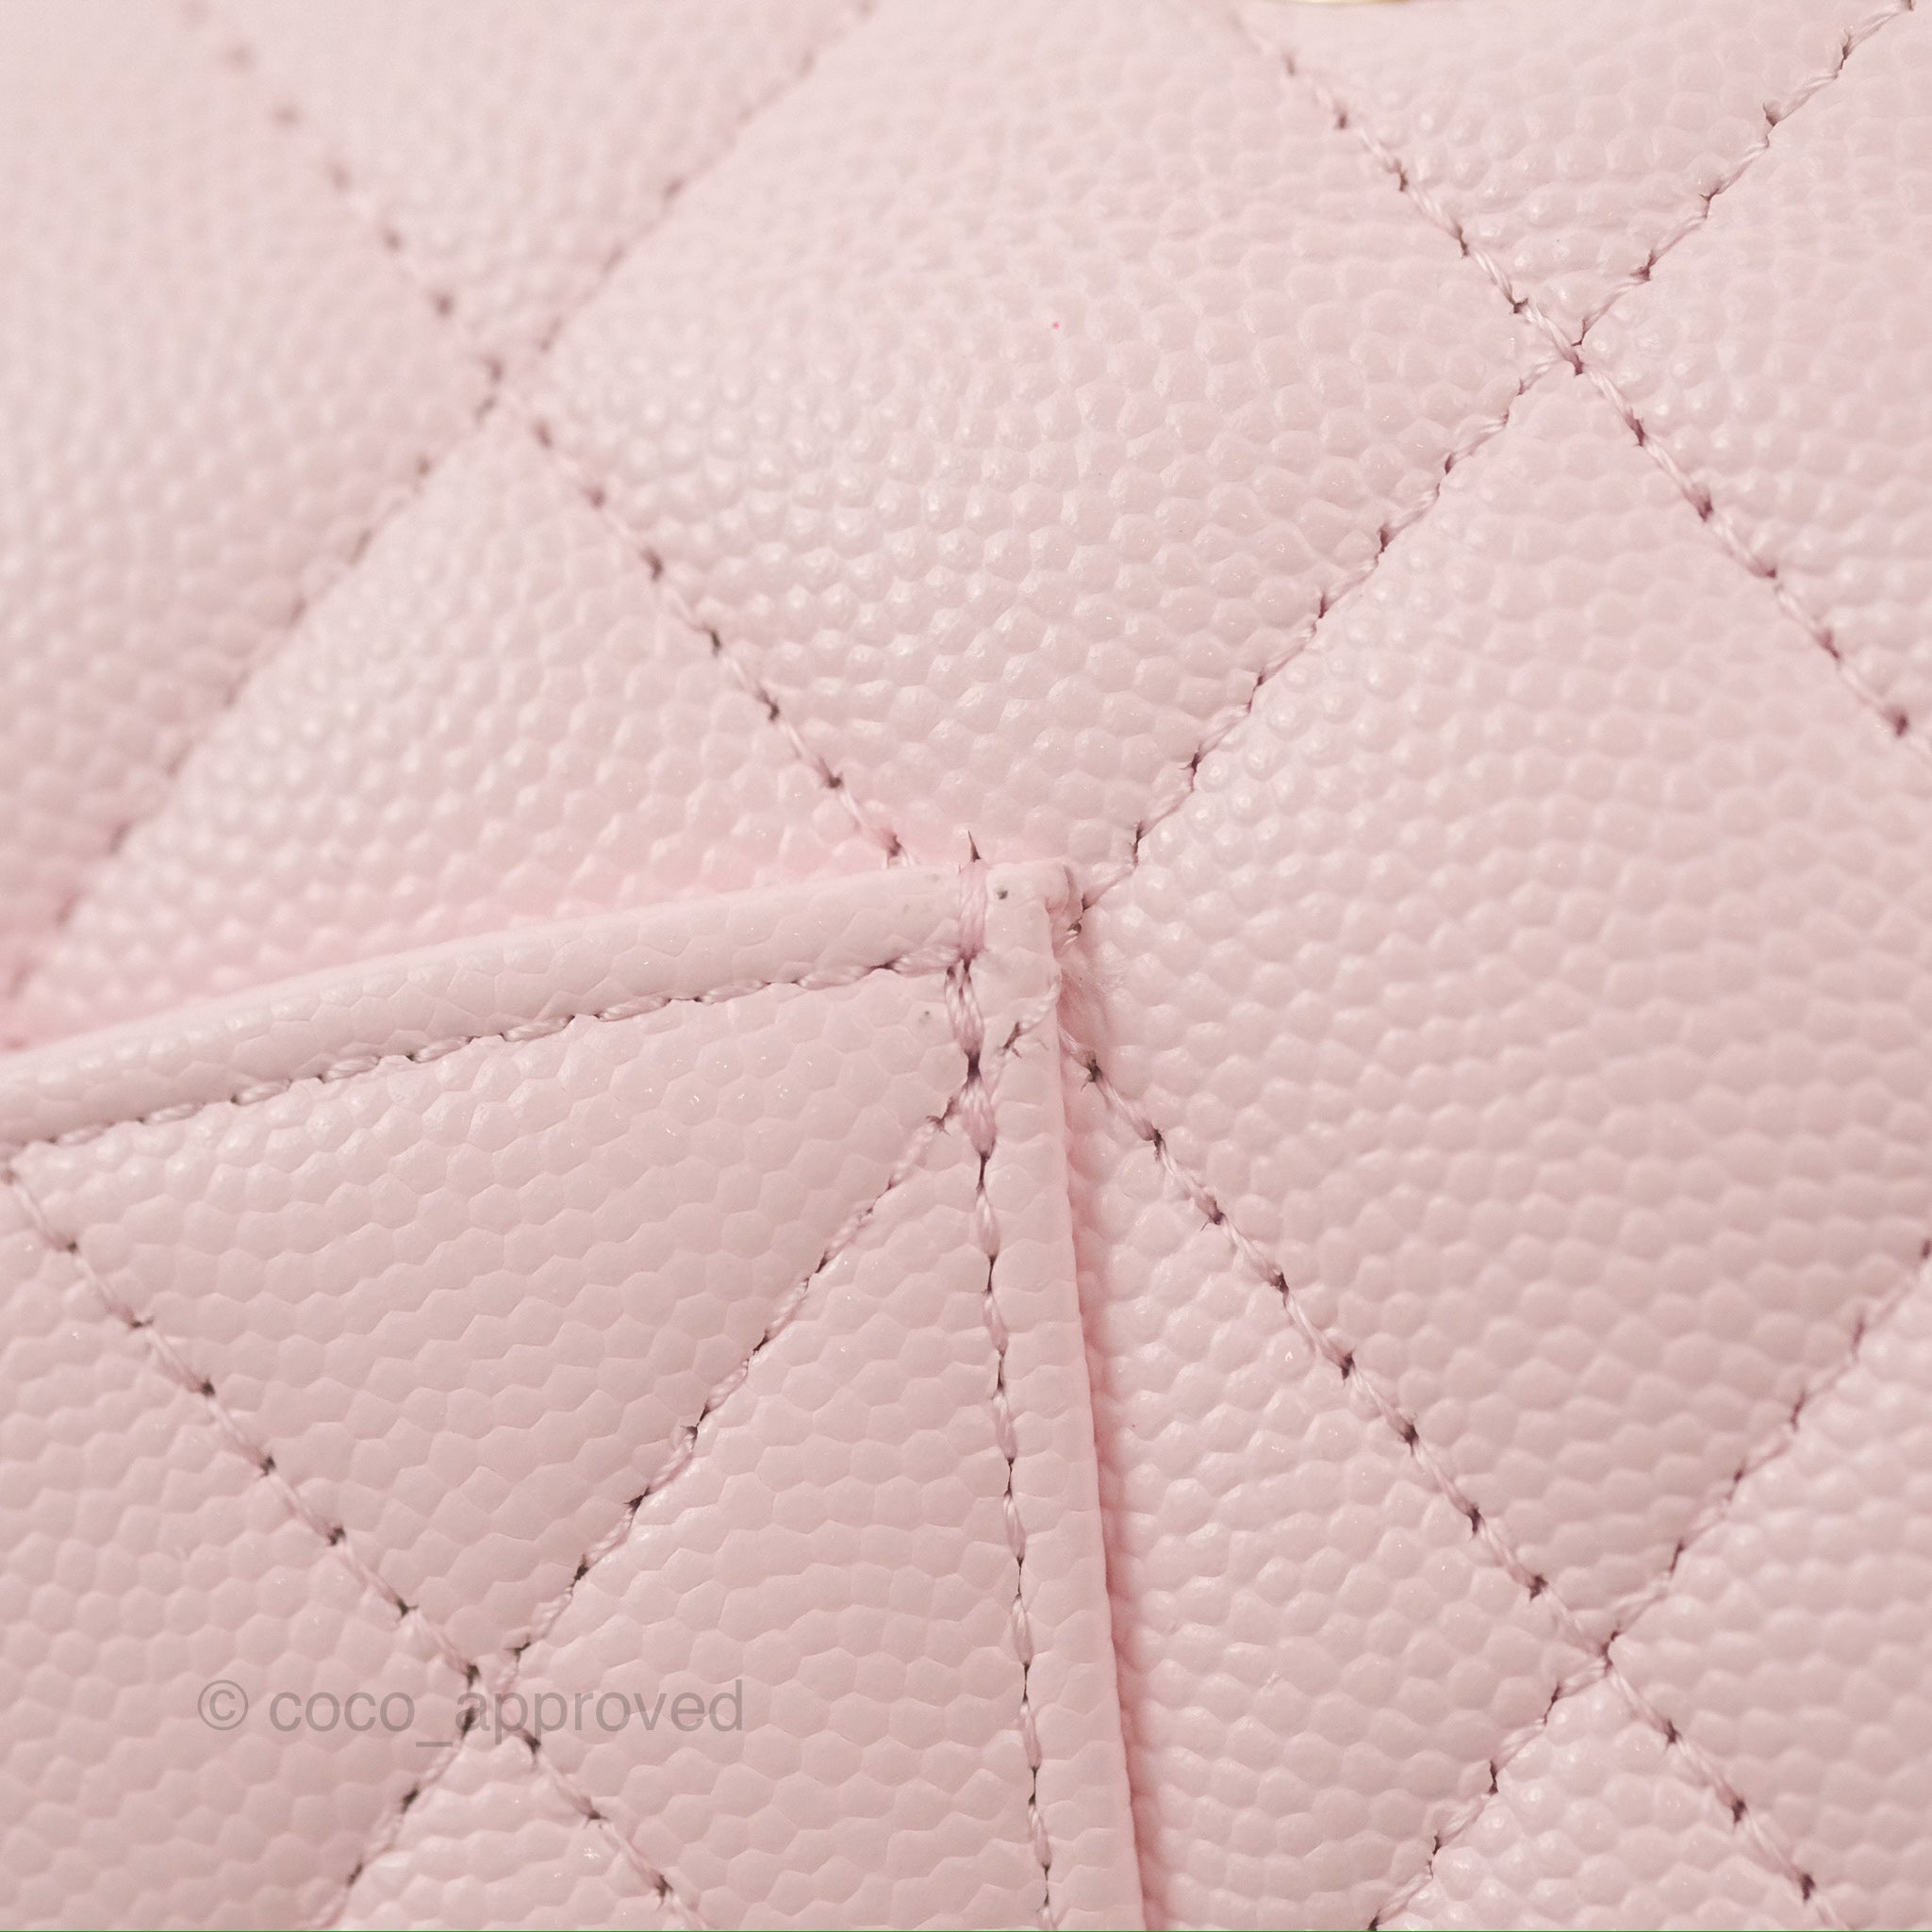 Chanel Classic M/L Medium Flap Quilted Light Pink Caviar Gold